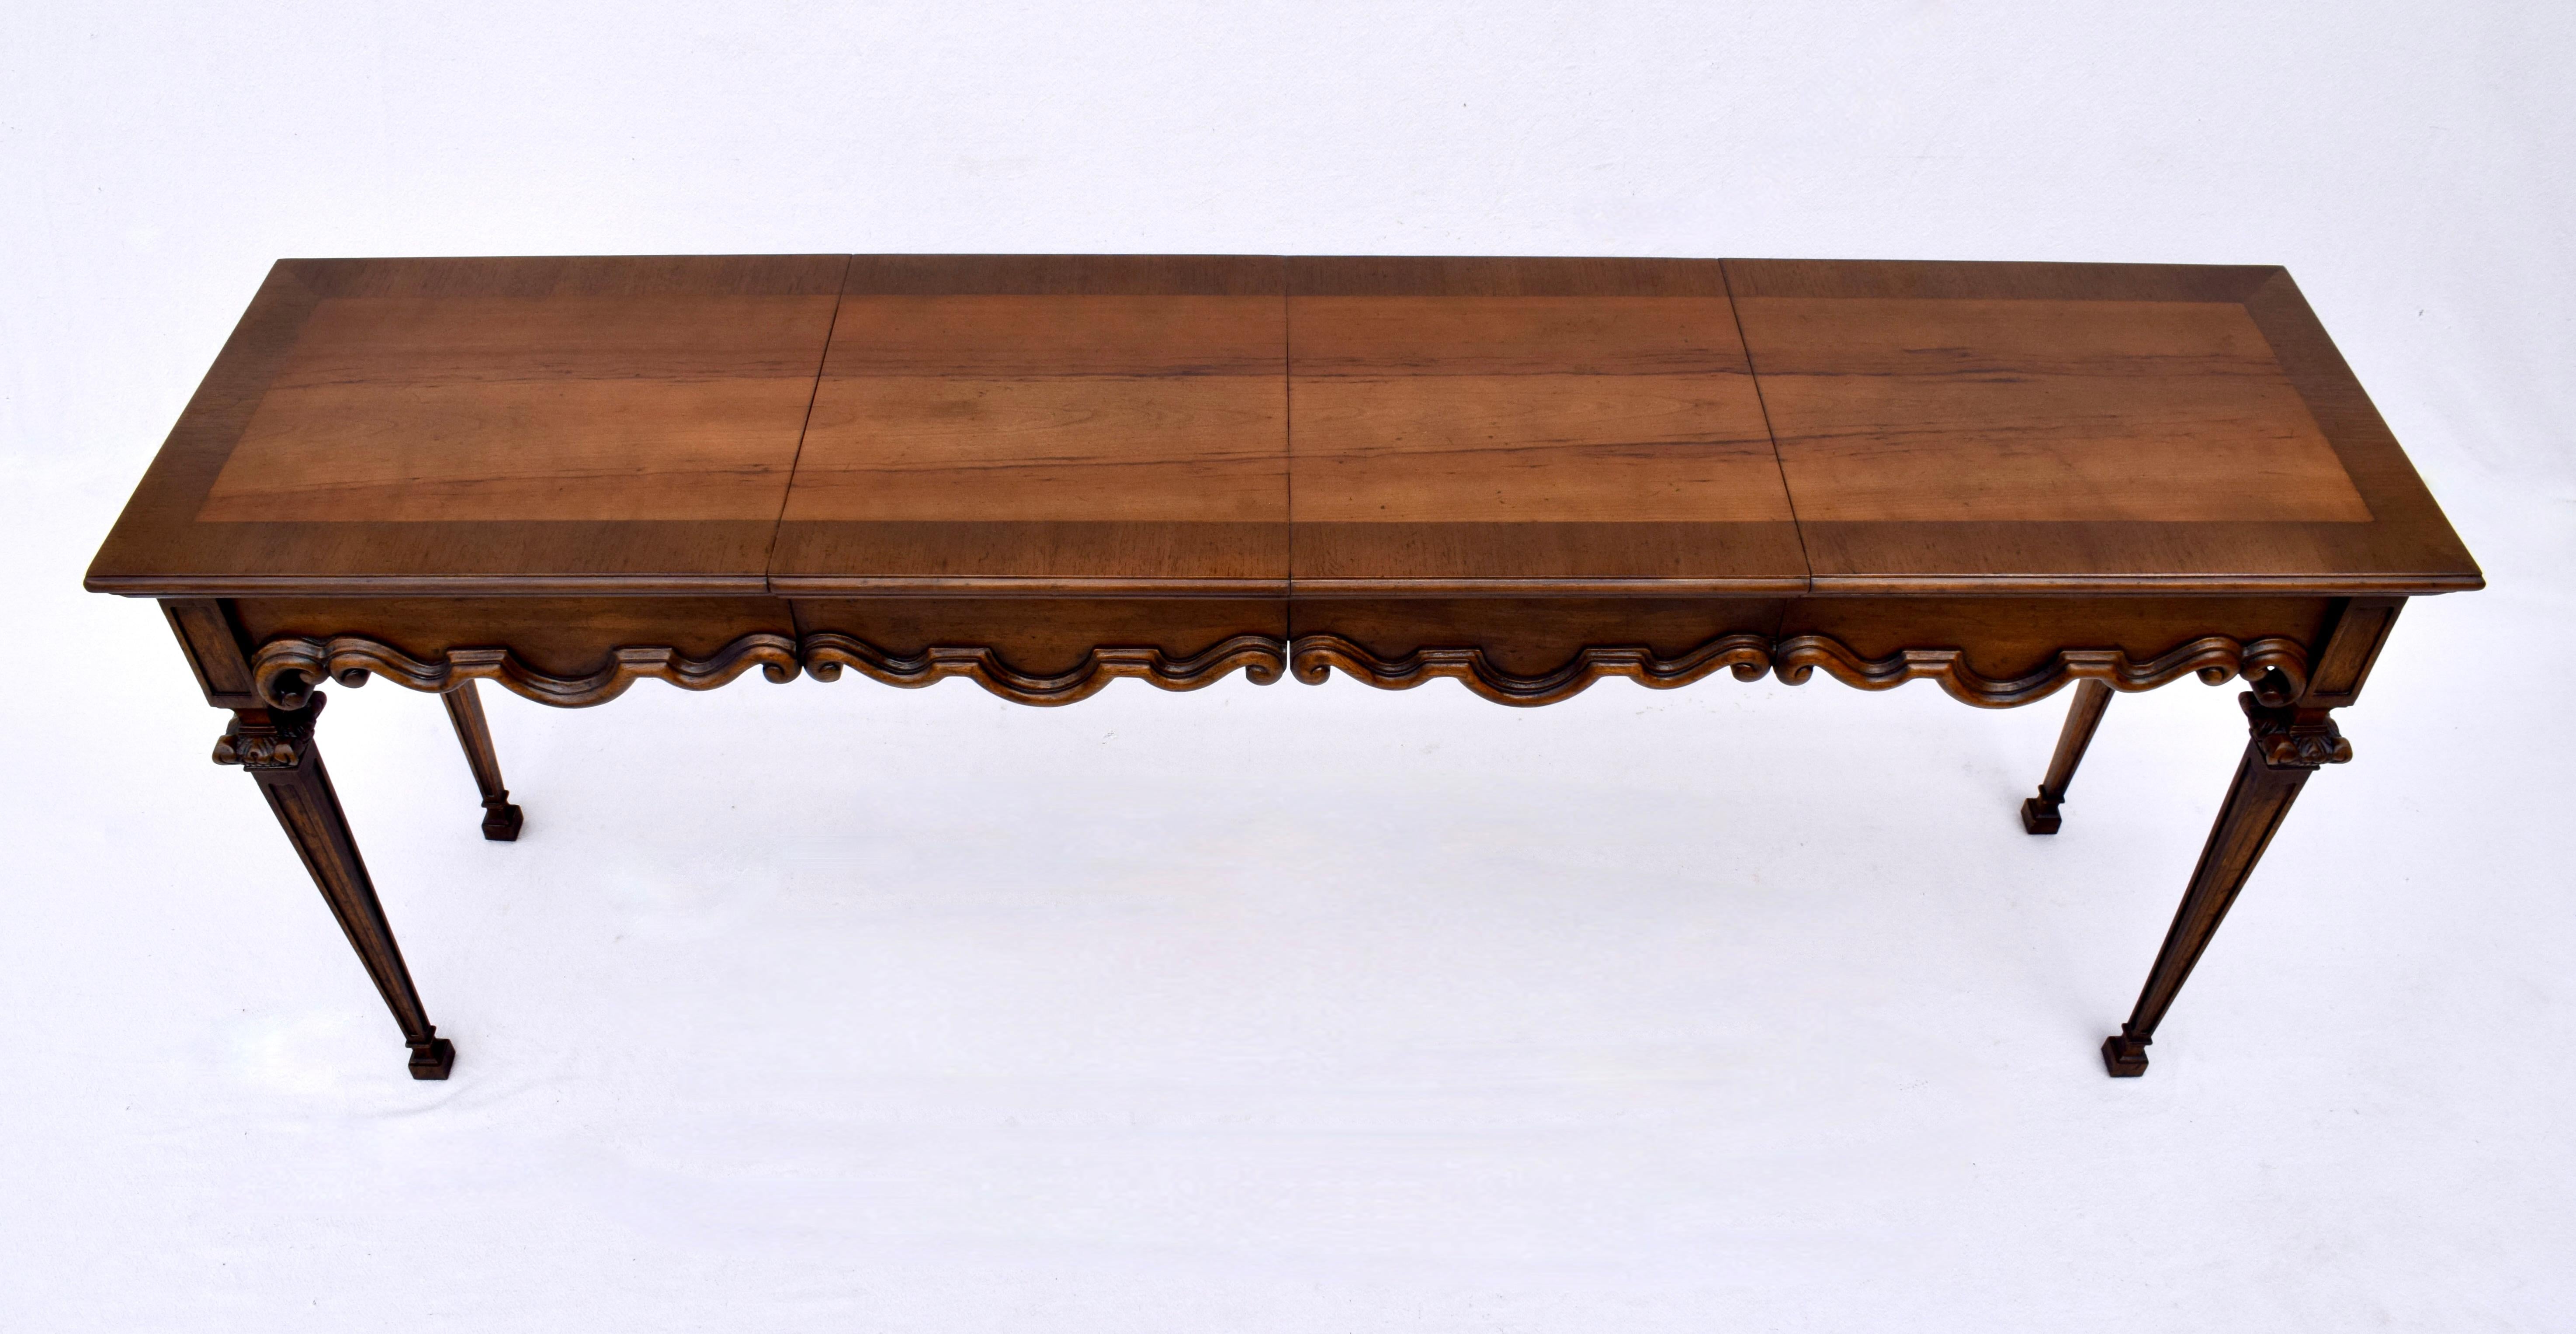 An unusual console table in the Neoclassical style with distinct Florentine design elements in the scalloped apron with bell flowers on the corner posts above square caps, ending in tapered legs. The versatile extendable two leaf top is newly